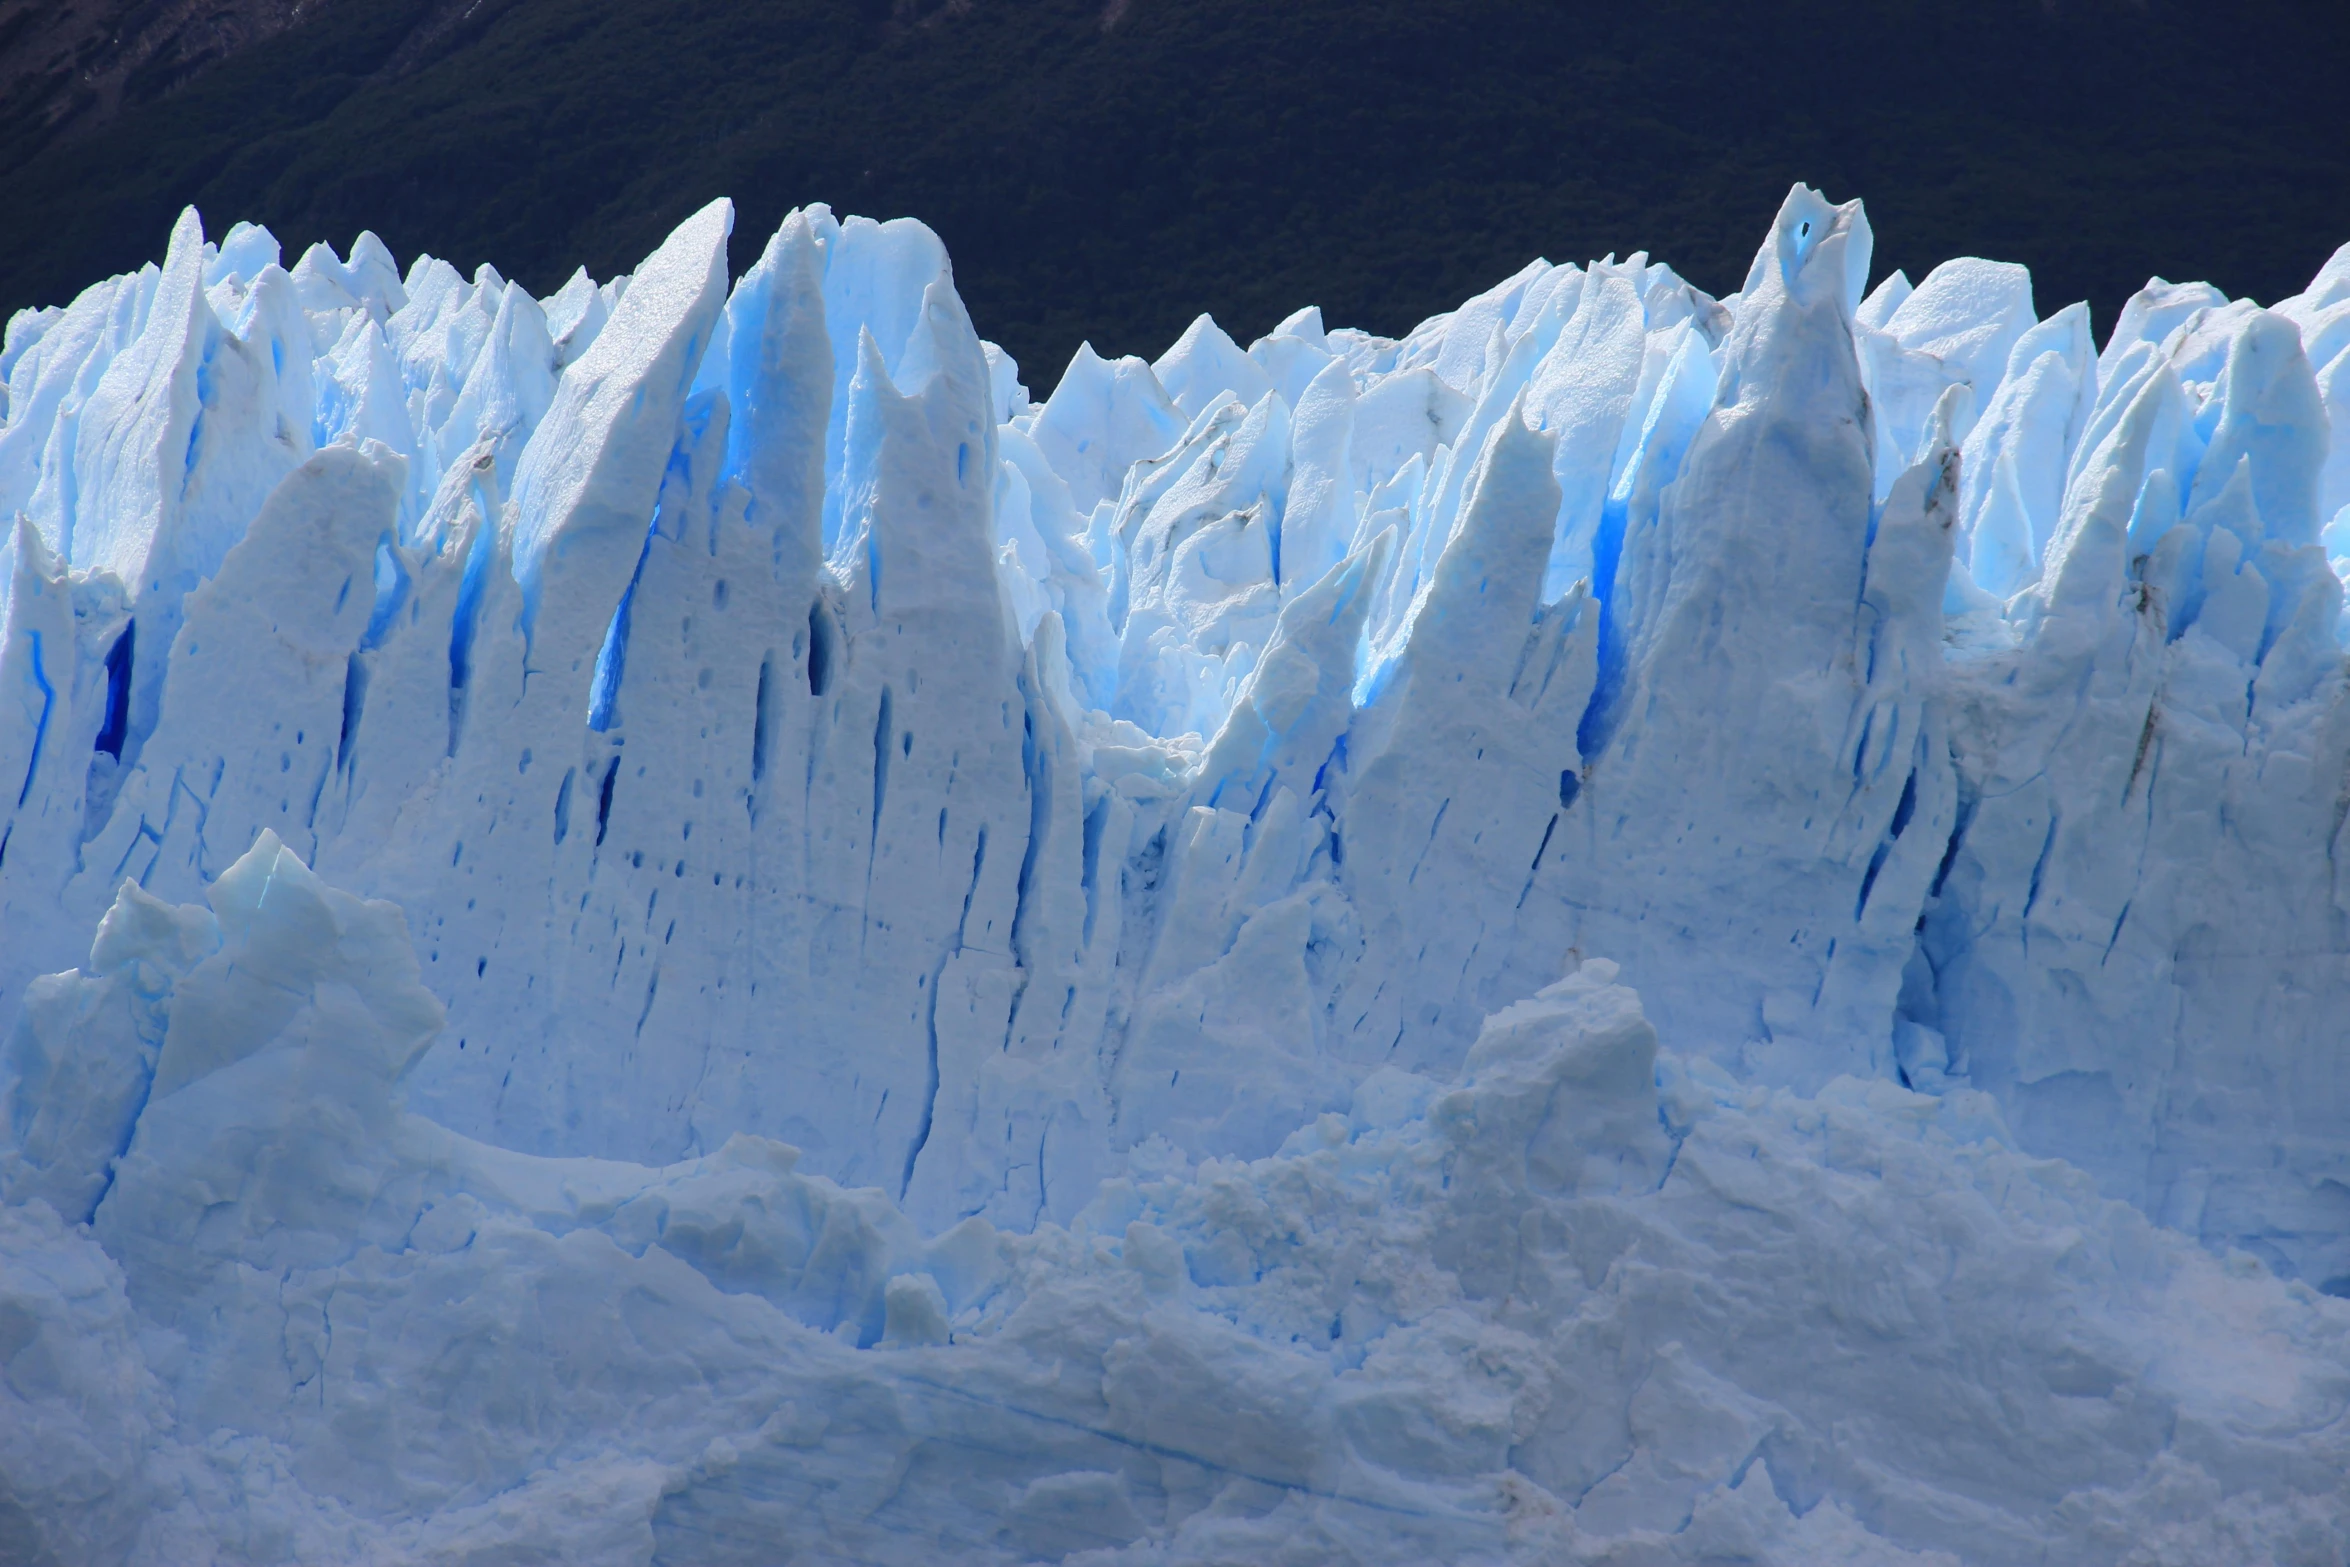 large iceberg with blue and white stripes on its face